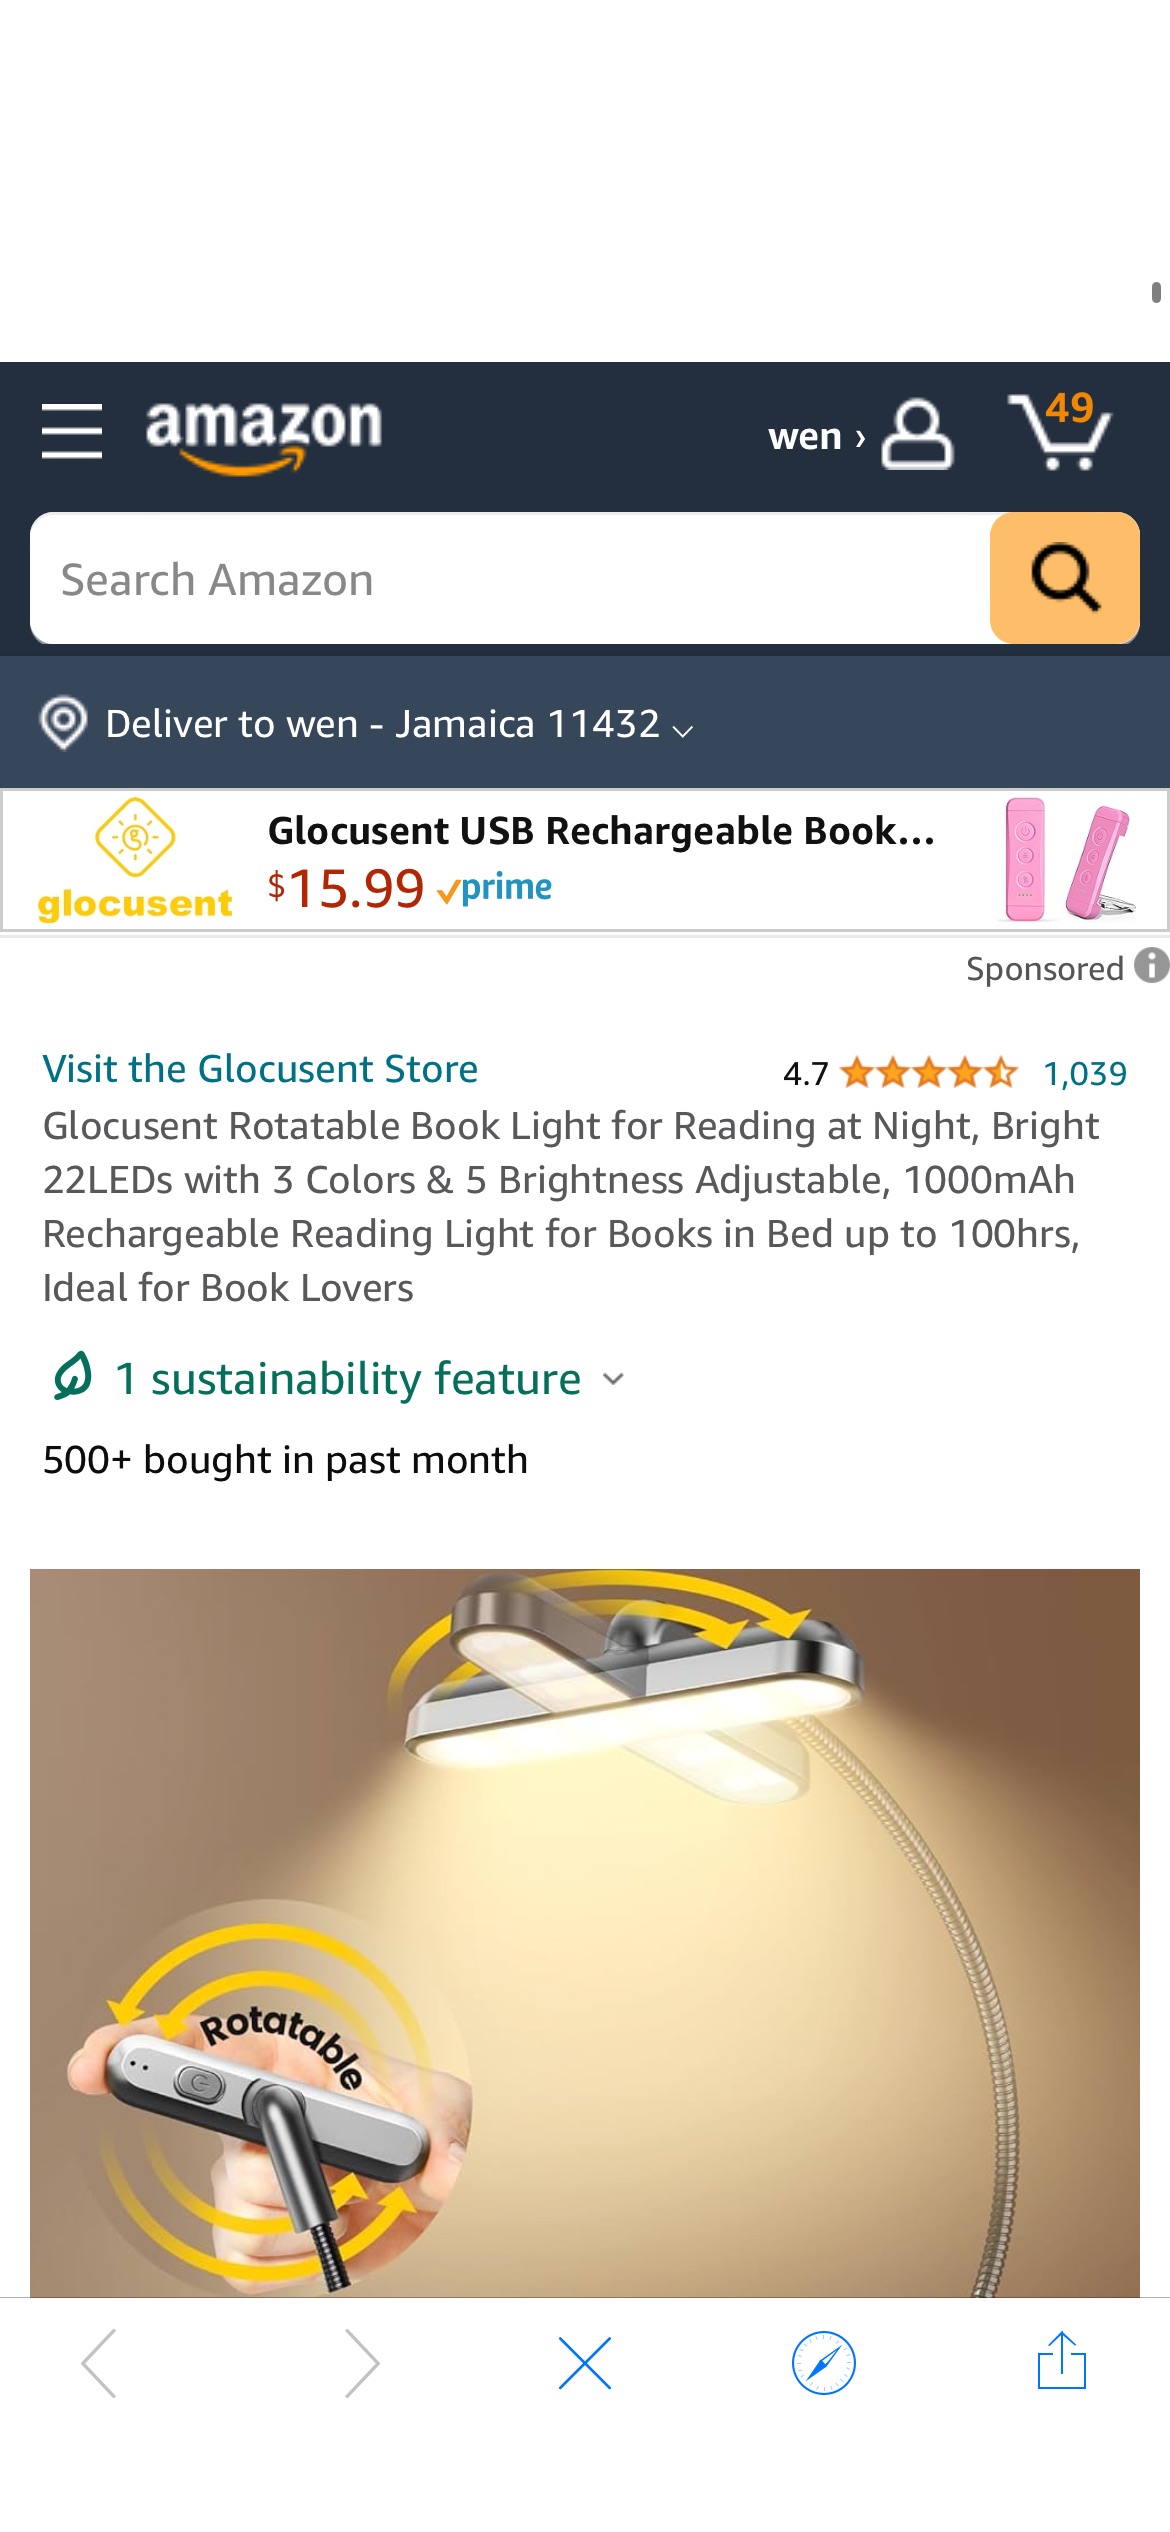 Glocusent Rotatable Book Light for Reading at Night, Bright 22LEDs with 3 Colors & 5 Brightness Adjustable, 1000mAh Rechargeable Reading Light for Books in Bed up to 100hrs, Ideal for Book Lovers - Am